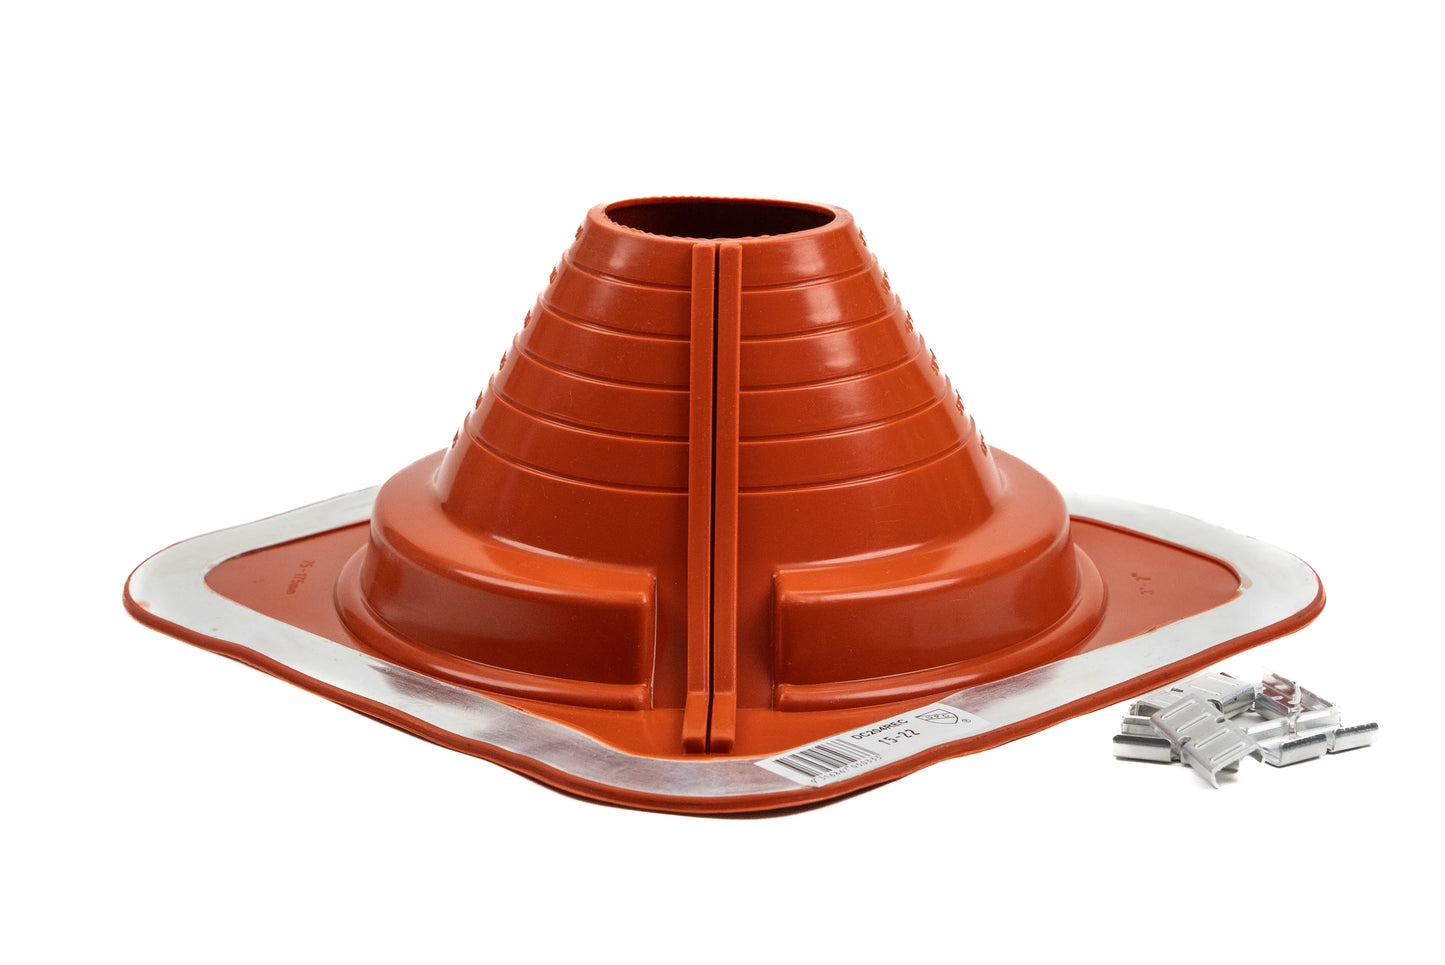 Dektite Combo Rubber Roof Flashing 75 - 175mm Red Silicone (DC204REC)